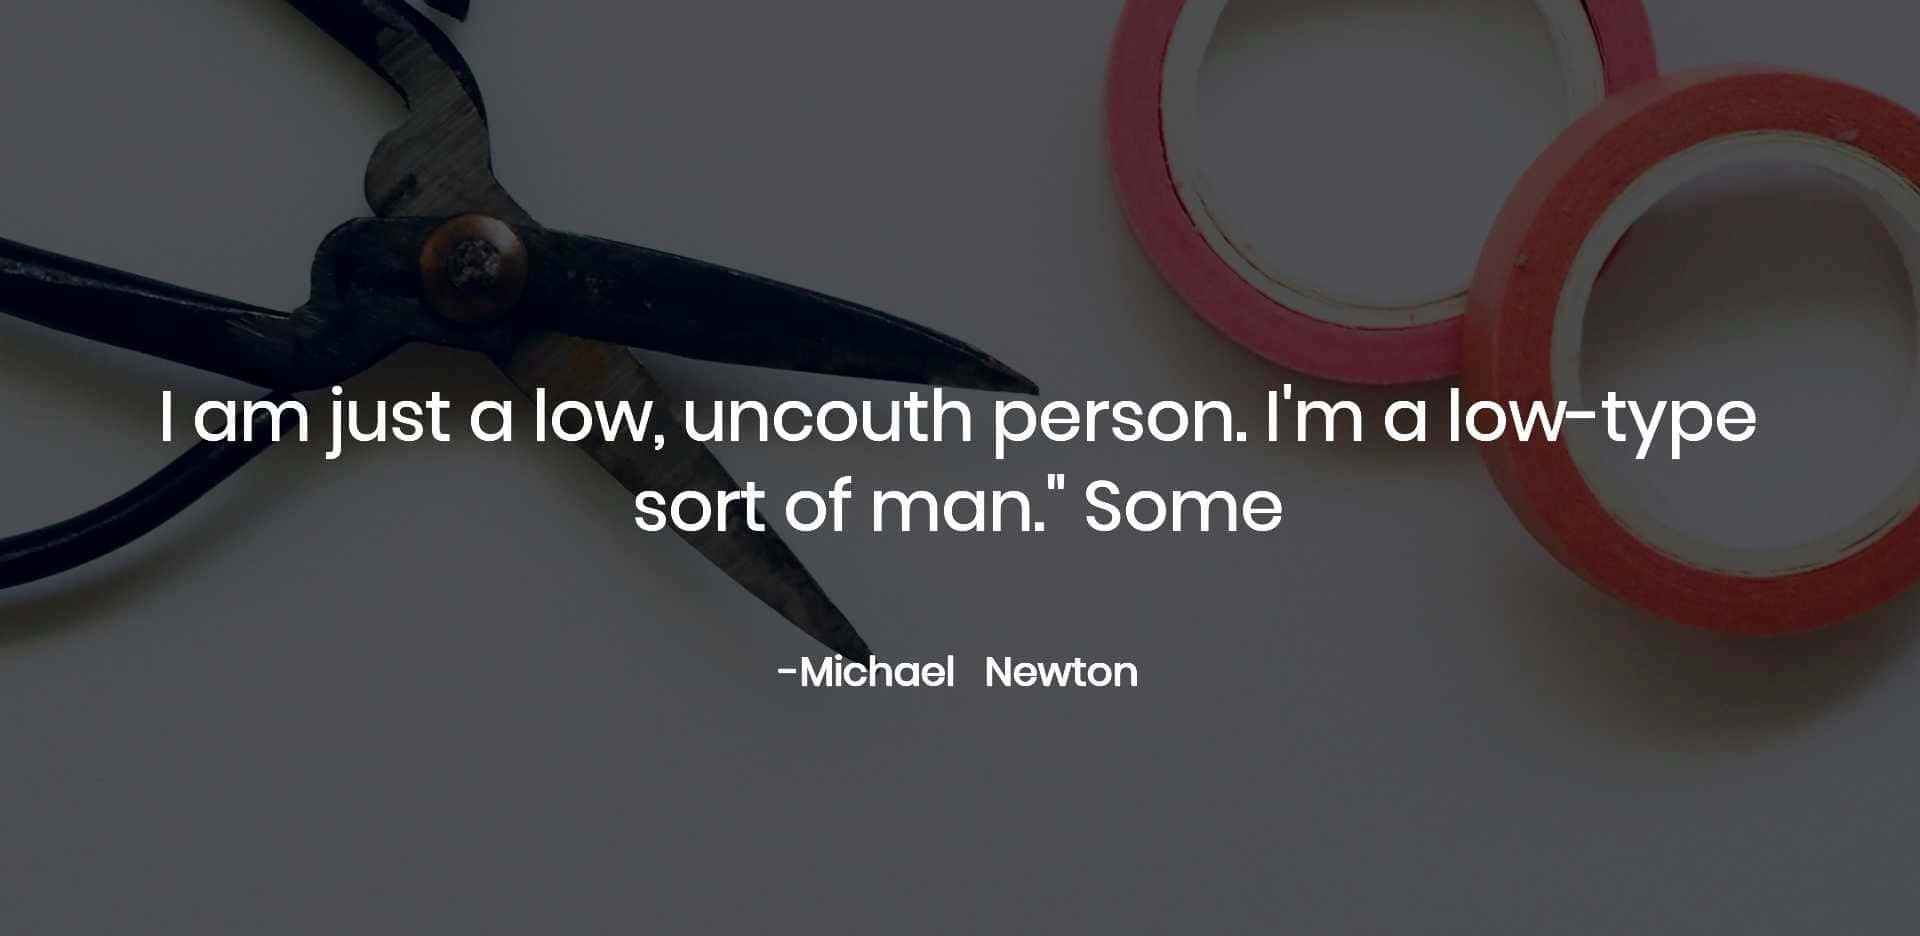 Uncouth Quotes From Michael Newton Wallpaper